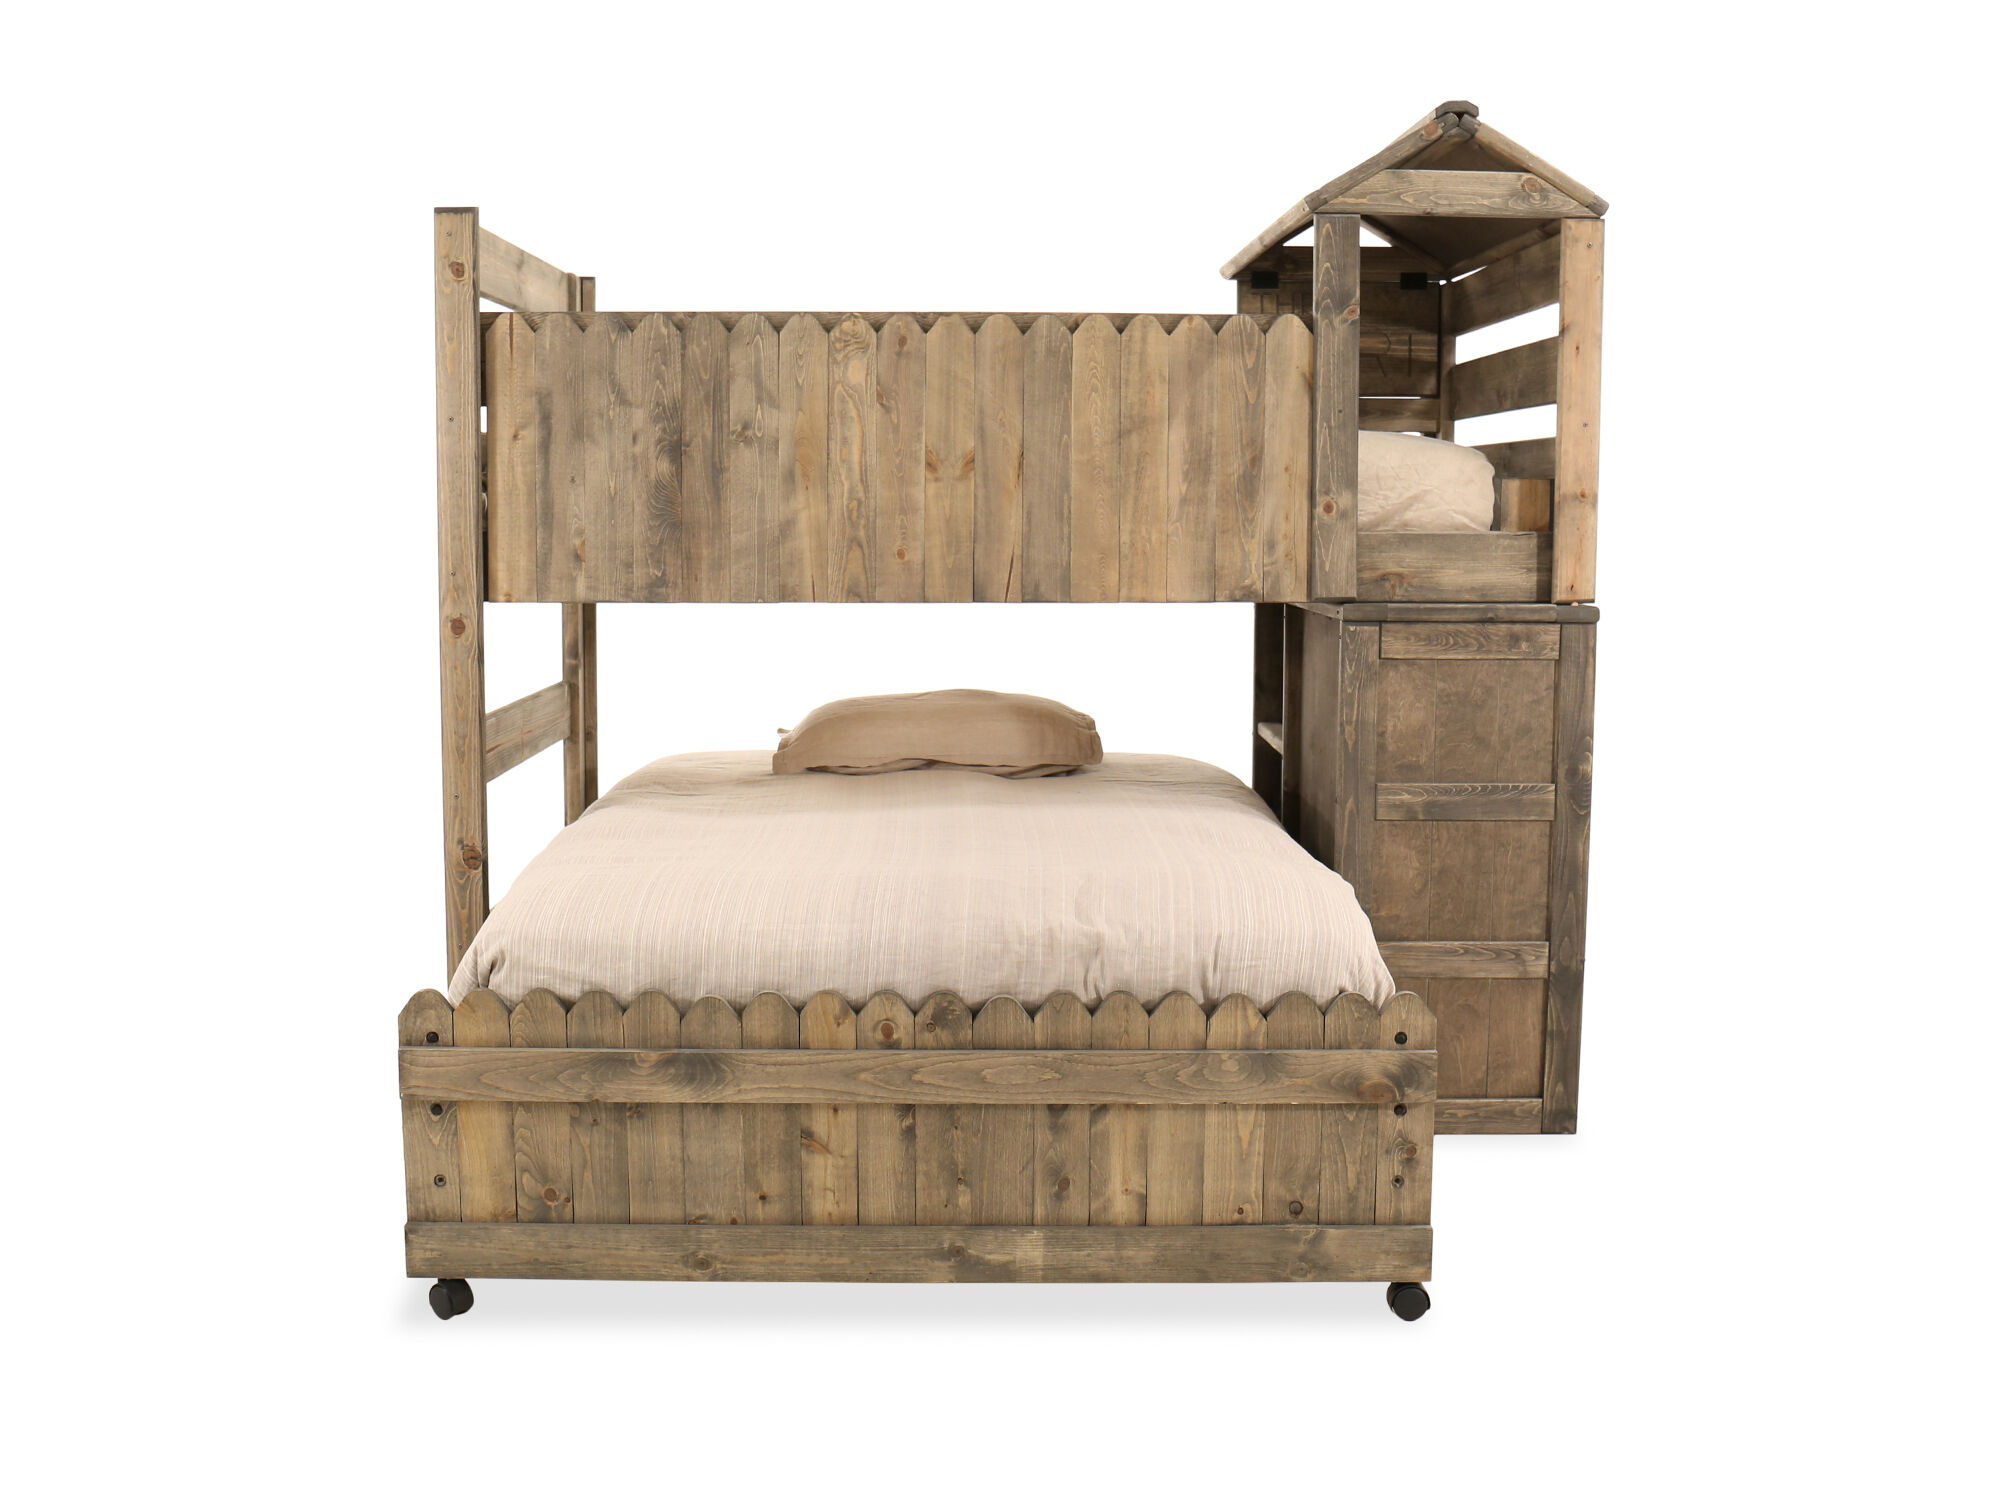 mathis brothers kids beds